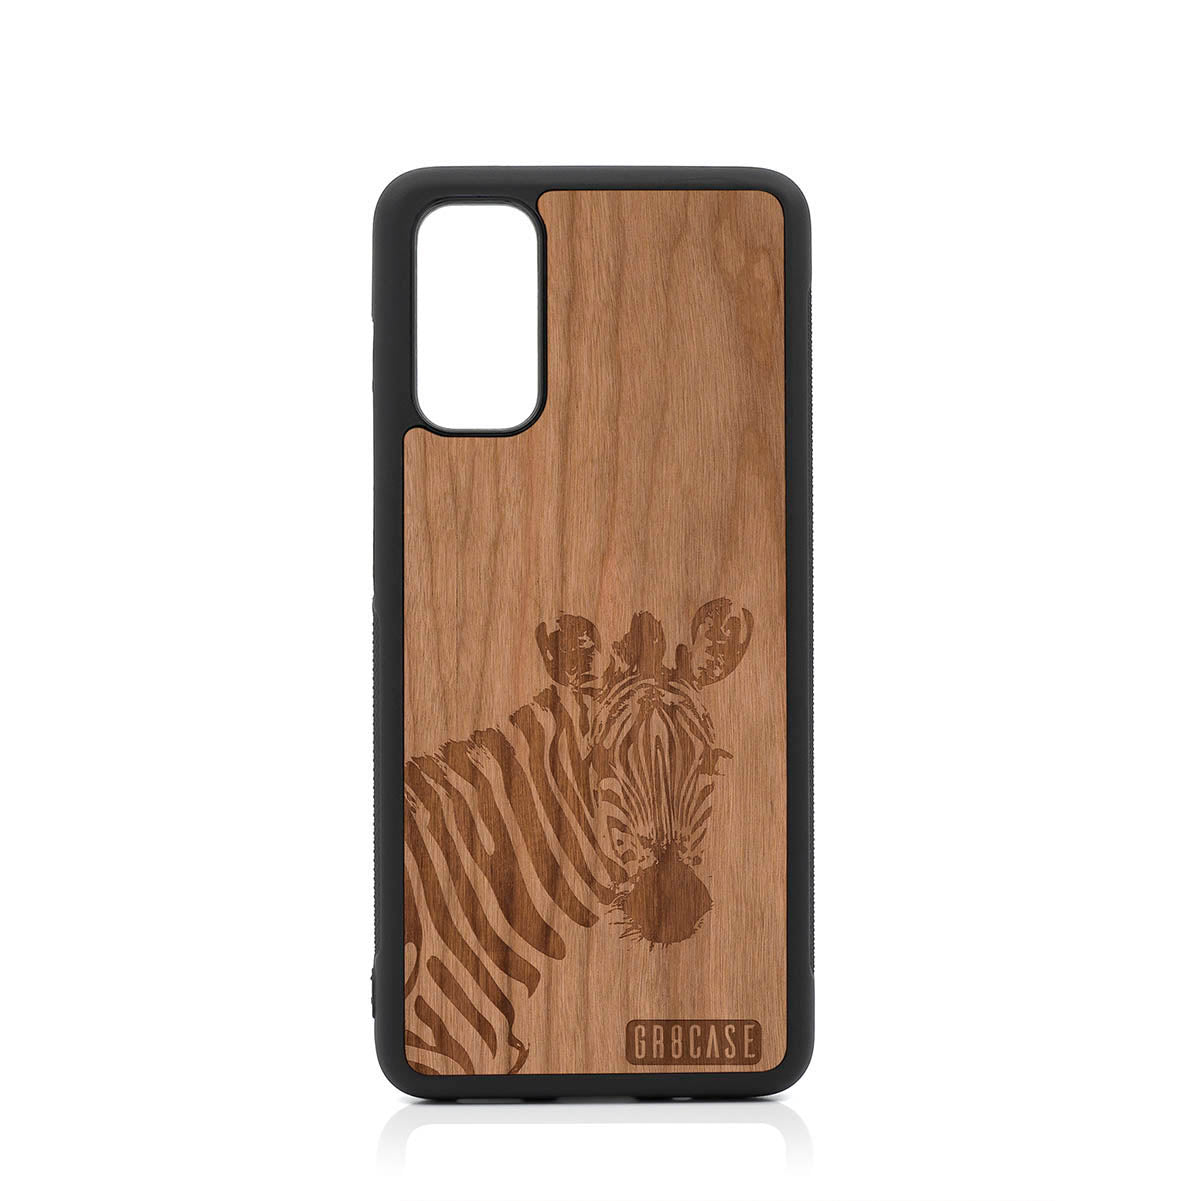 Lookout Zebra Design Wood Case For Samsung Galaxy S20